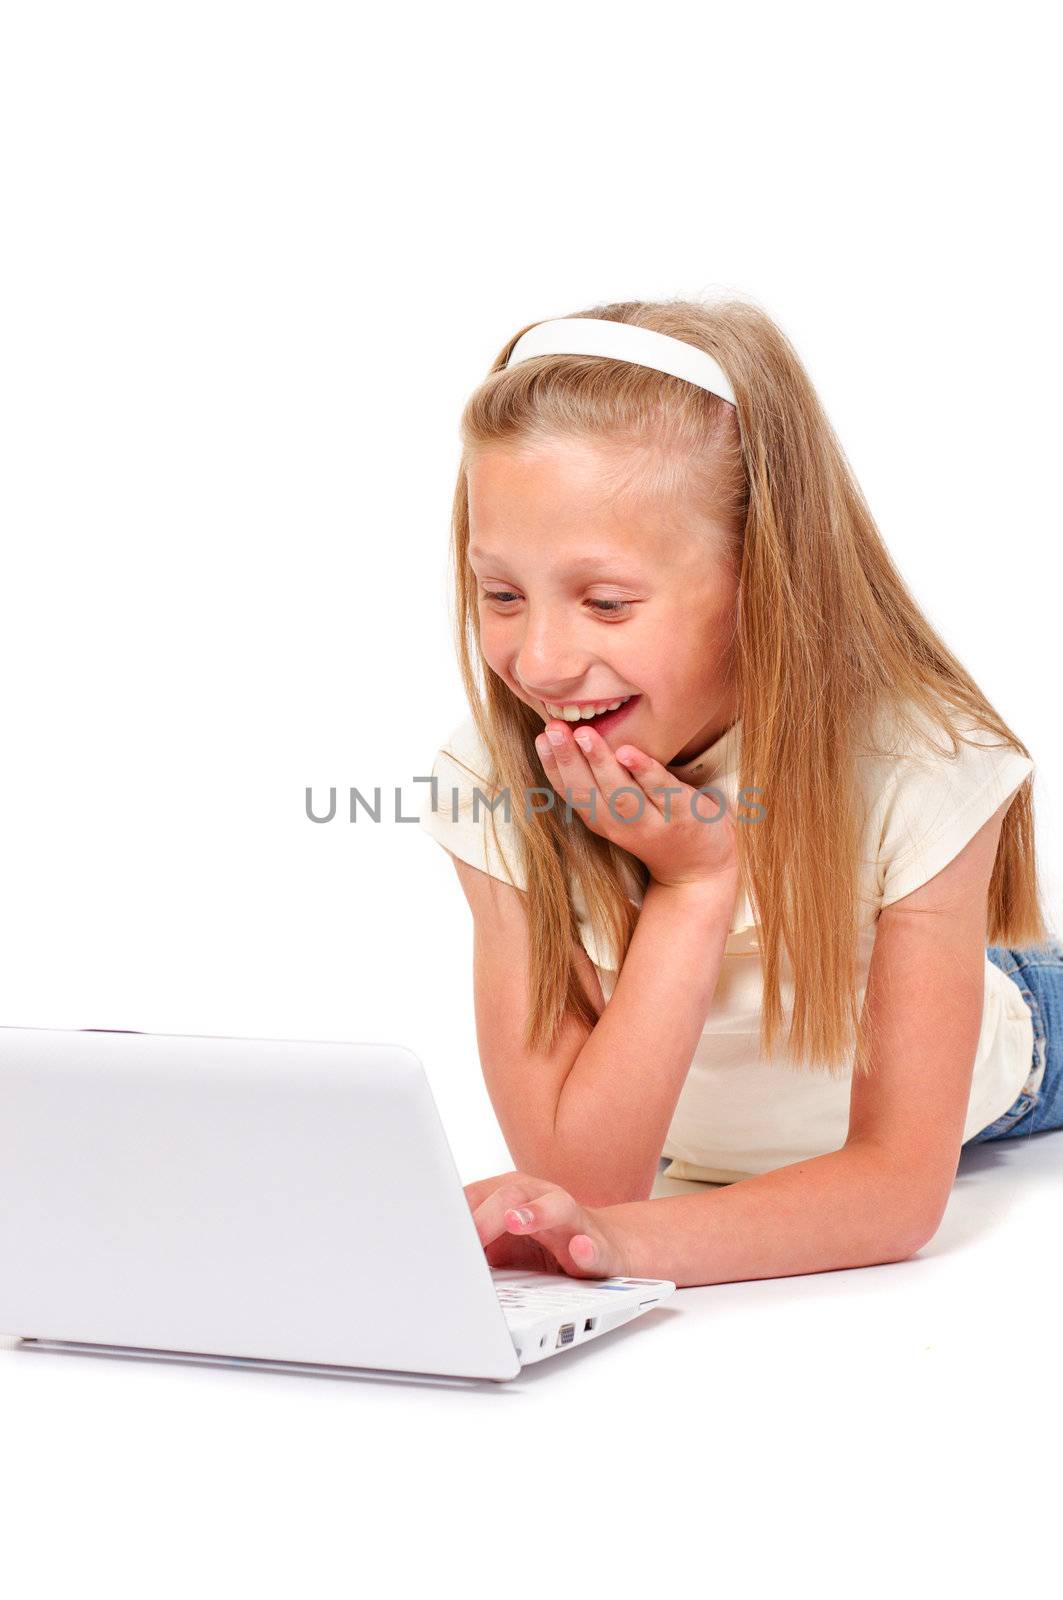 Happy and smiling little girl with laptop on white background isolated